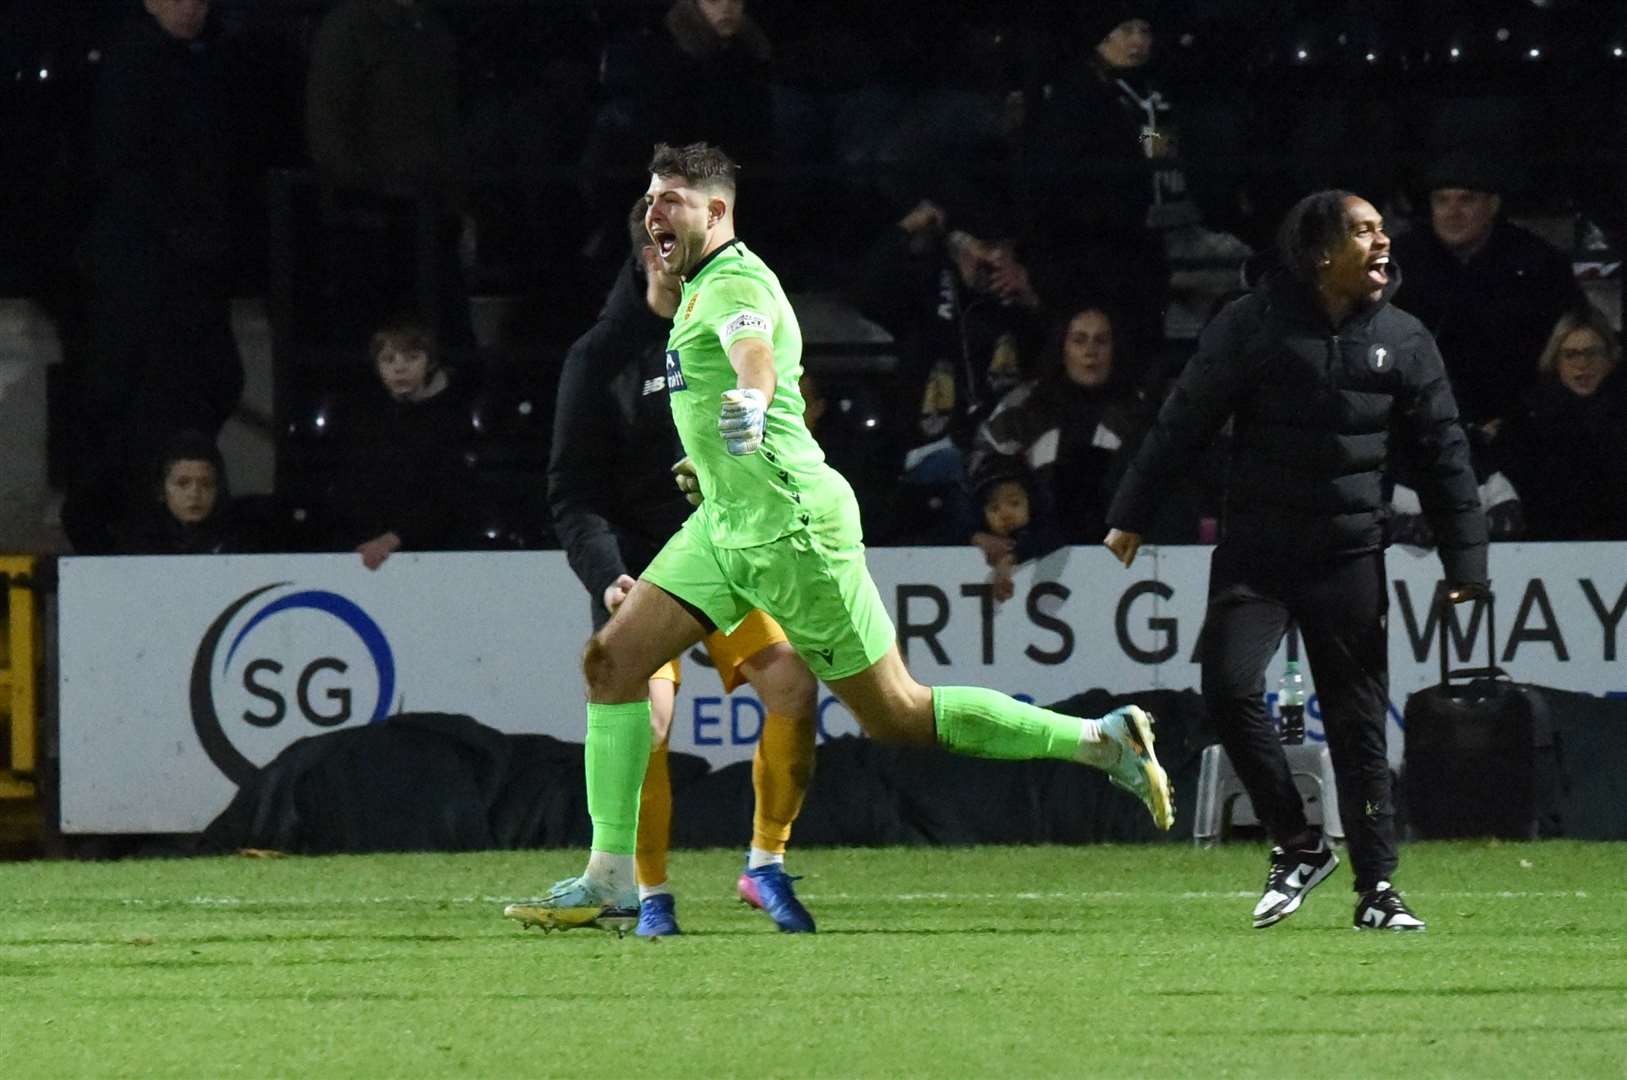 Tom Hadler enjoys the moment after Maidstone's penalty shoot-out success at Meadow Lane. Picture: Steve Terrell